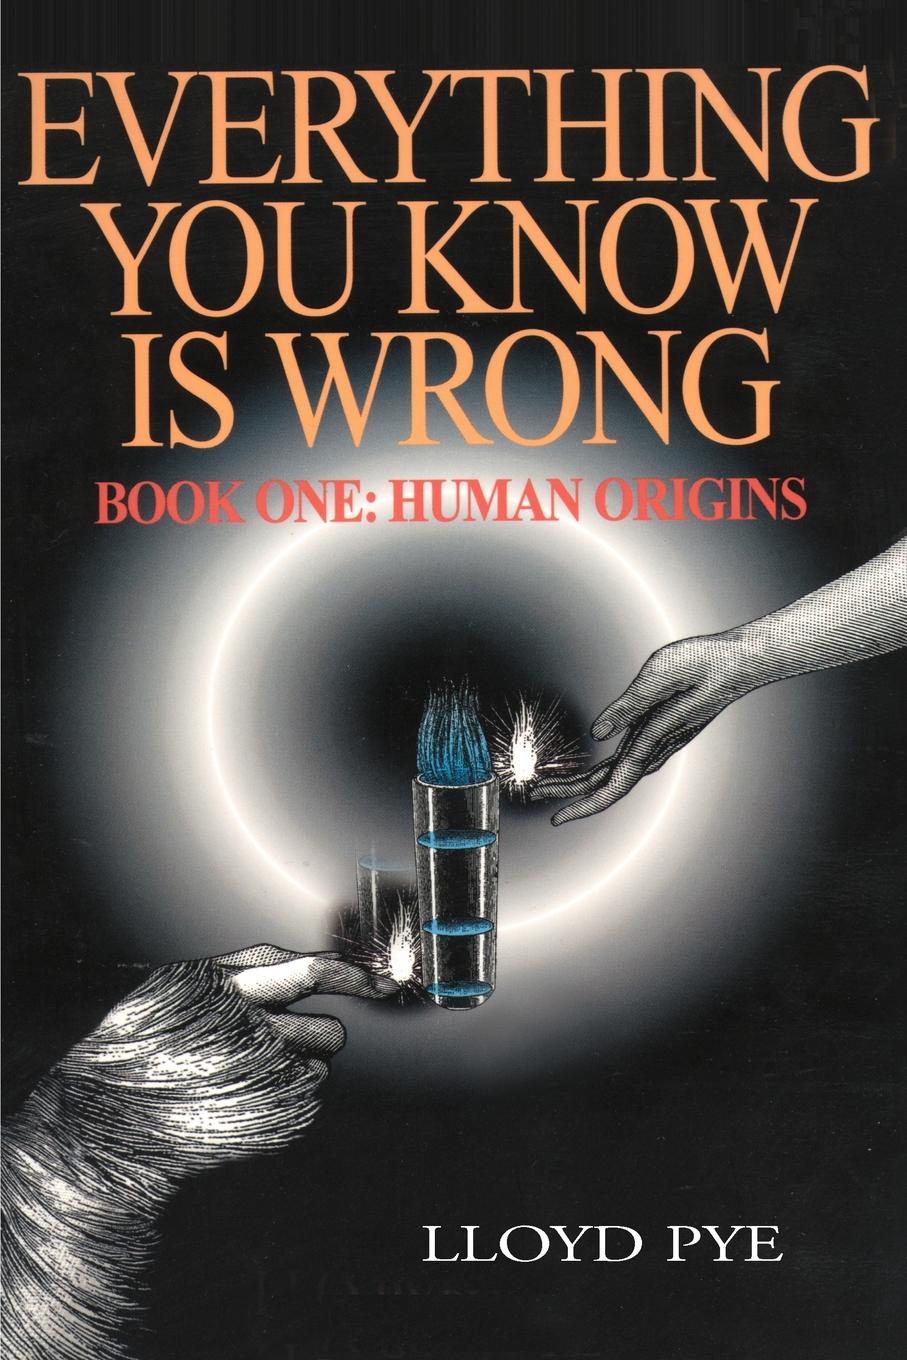 Книга misconceptions. Human one. Wrong book